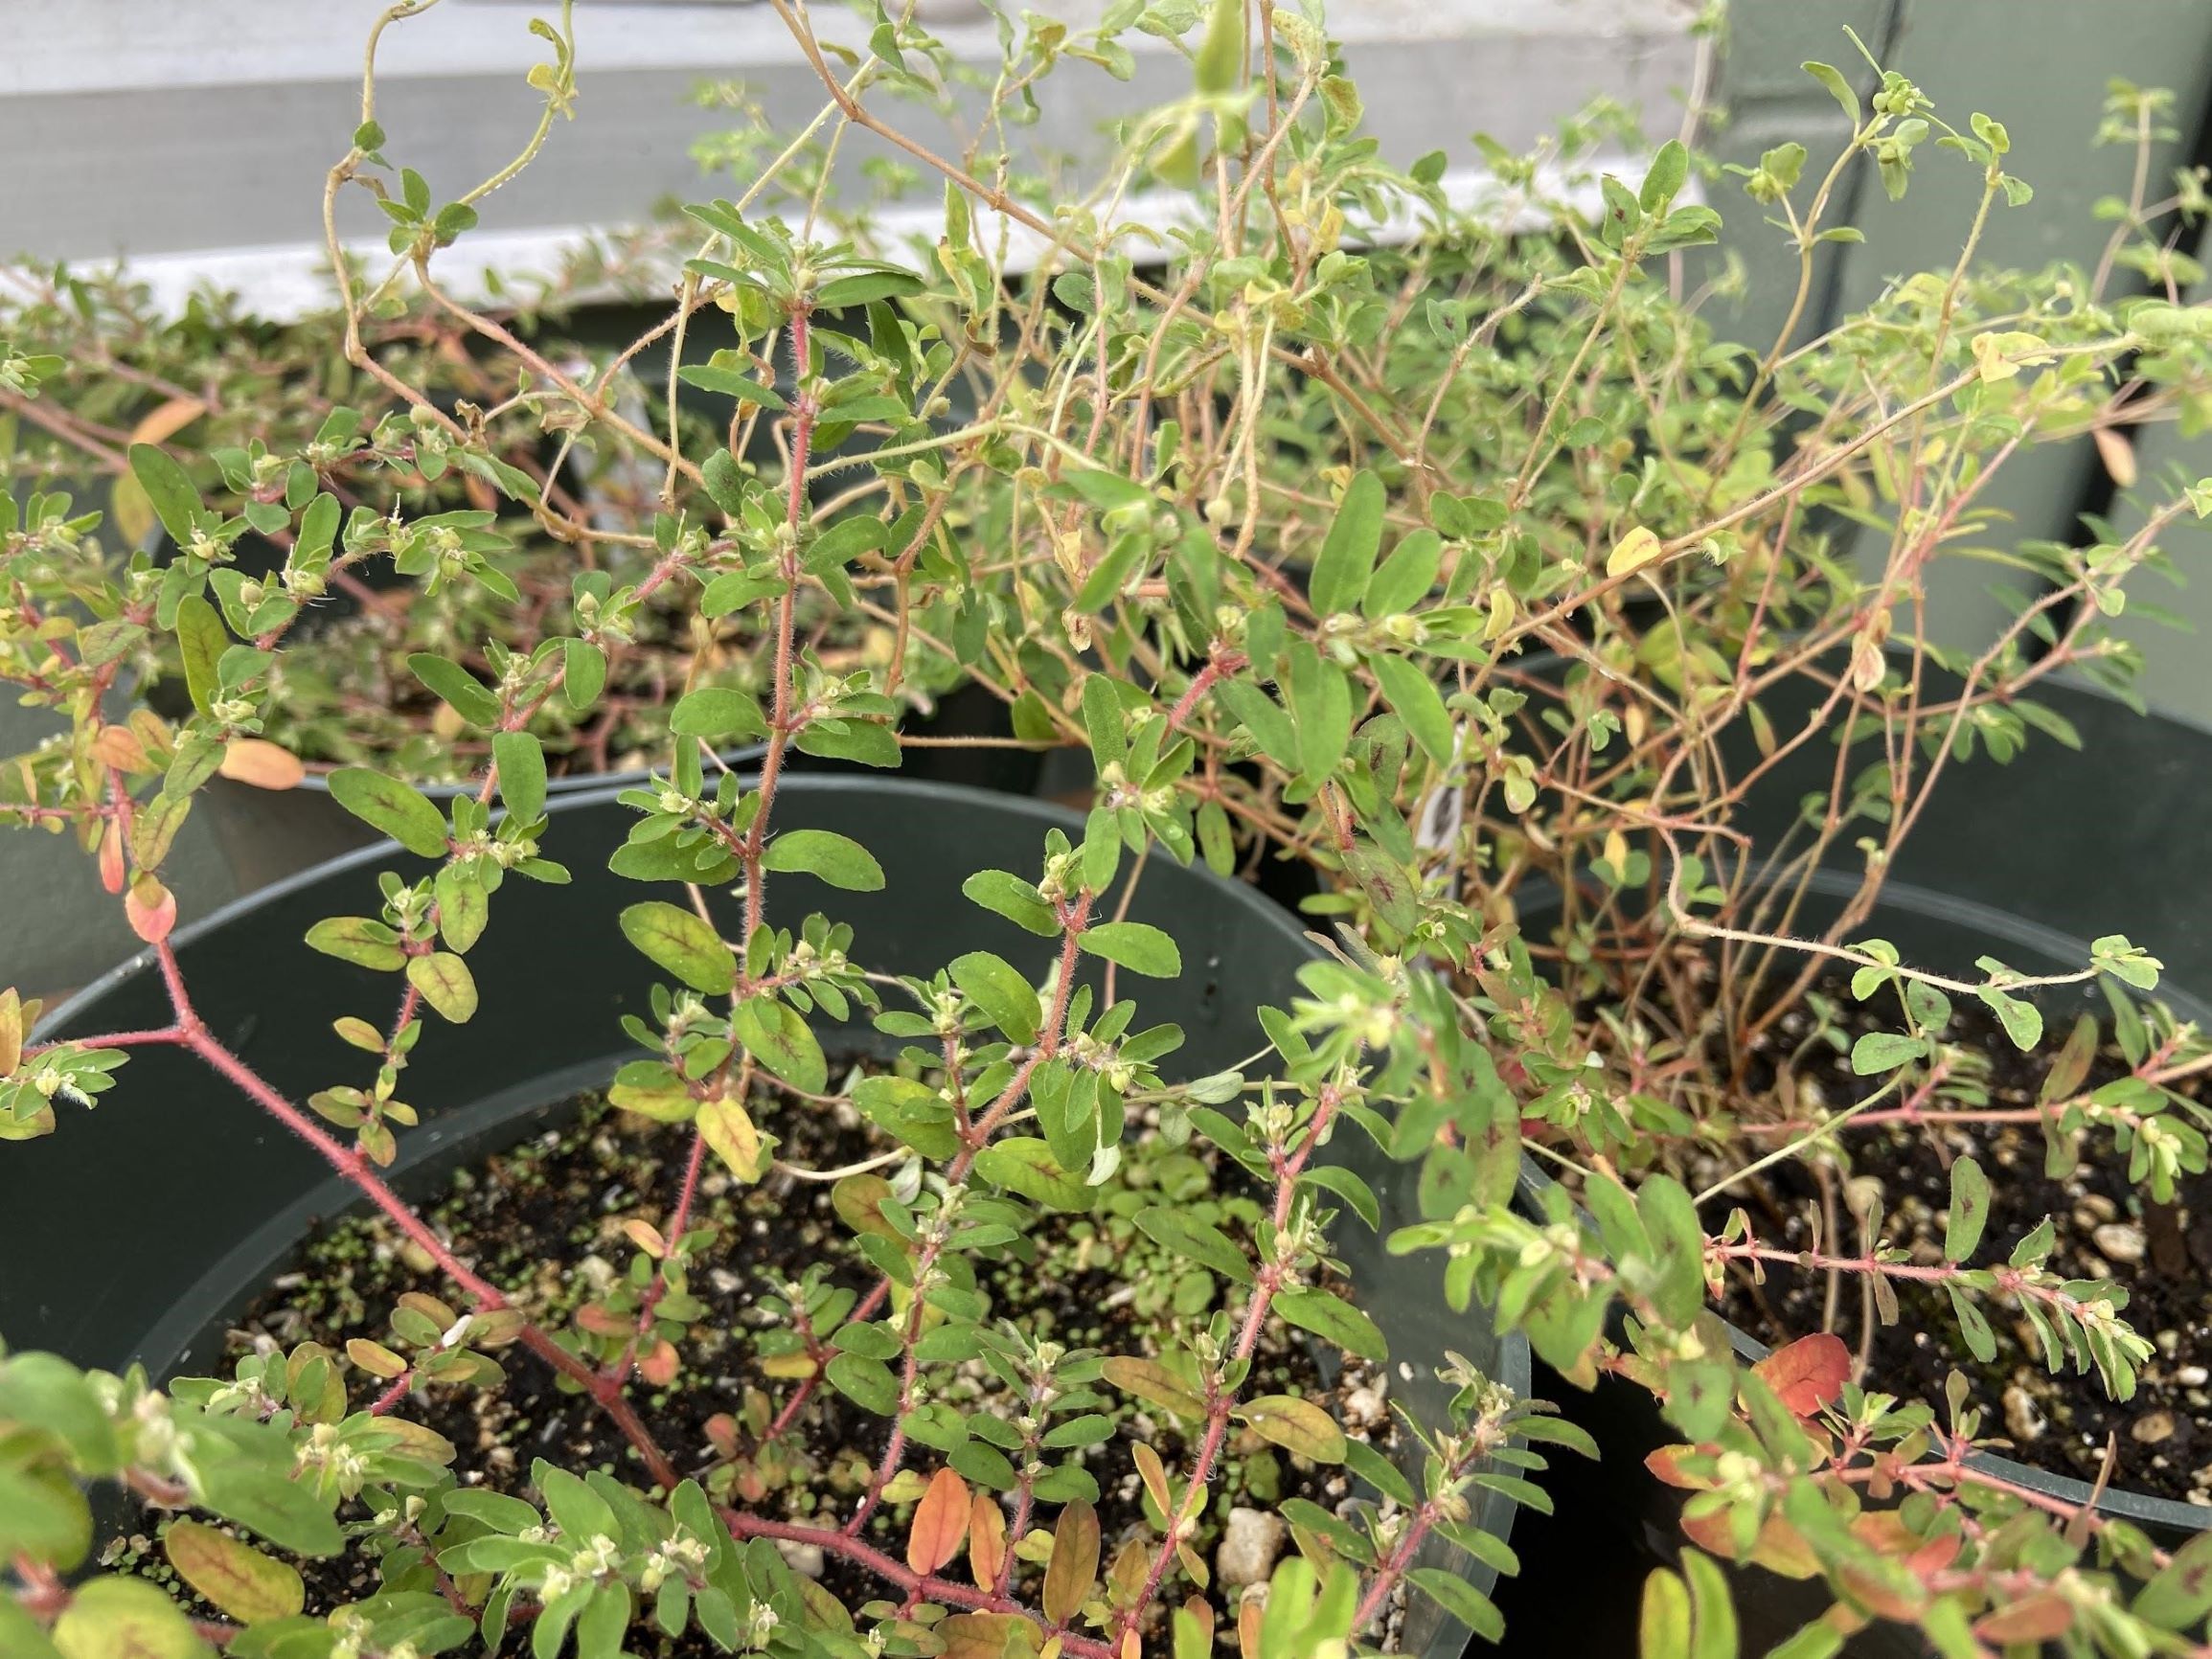 spotted spurge growing in a pot in the greenhouse